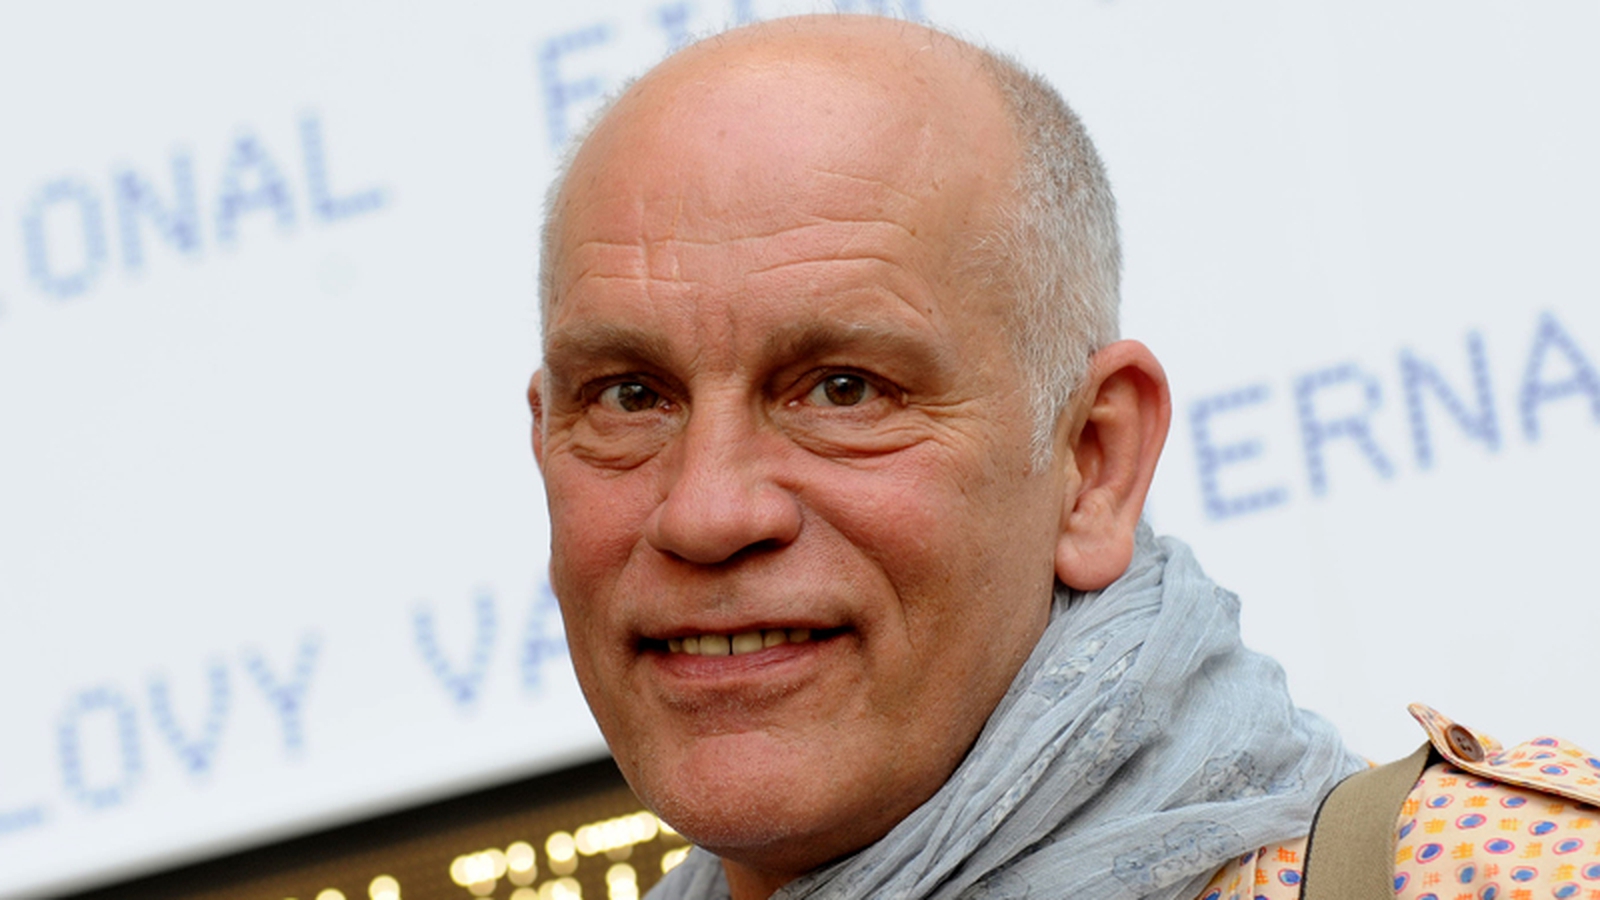 John Malkovich joins Jude Law in The New Pope